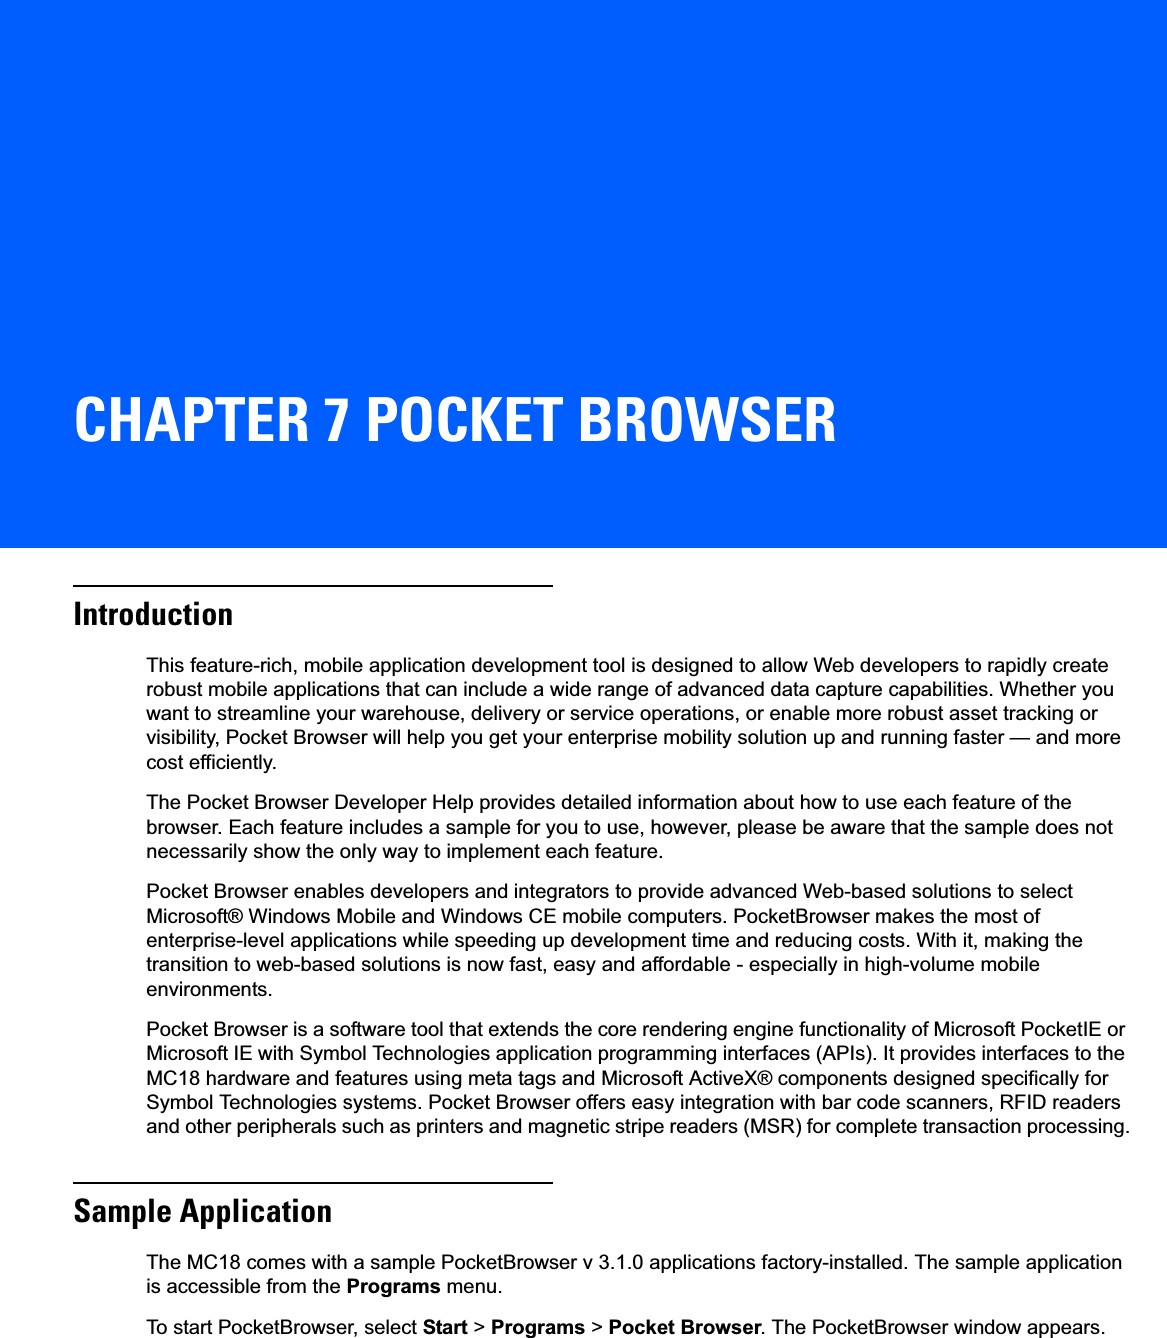 CHAPTER 7 POCKET BROWSERIntroductionThis feature-rich, mobile application development tool is designed to allow Web developers to rapidly create robust mobile applications that can include a wide range of advanced data capture capabilities. Whether you want to streamline your warehouse, delivery or service operations, or enable more robust asset tracking or visibility, Pocket Browser will help you get your enterprise mobility solution up and running faster — and more cost efficiently.The Pocket Browser Developer Help provides detailed information about how to use each feature of the browser. Each feature includes a sample for you to use, however, please be aware that the sample does not necessarily show the only way to implement each feature.Pocket Browser enables developers and integrators to provide advanced Web-based solutions to select Microsoft® Windows Mobile and Windows CE mobile computers. PocketBrowser makes the most of enterprise-level applications while speeding up development time and reducing costs. With it, making the transition to web-based solutions is now fast, easy and affordable - especially in high-volume mobile environments.Pocket Browser is a software tool that extends the core rendering engine functionality of Microsoft PocketIE or Microsoft IE with Symbol Technologies application programming interfaces (APIs). It provides interfaces to the MC18 hardware and features using meta tags and Microsoft ActiveX® components designed specifically for Symbol Technologies systems. Pocket Browser offers easy integration with bar code scanners, RFID readers and other peripherals such as printers and magnetic stripe readers (MSR) for complete transaction processing.Sample ApplicationThe MC18 comes with a sample PocketBrowser v 3.1.0 applications factory-installed. The sample application is accessible from the Programs menu.To start PocketBrowser, select Start &gt; Programs &gt; Pocket Browser. The PocketBrowser window appears.